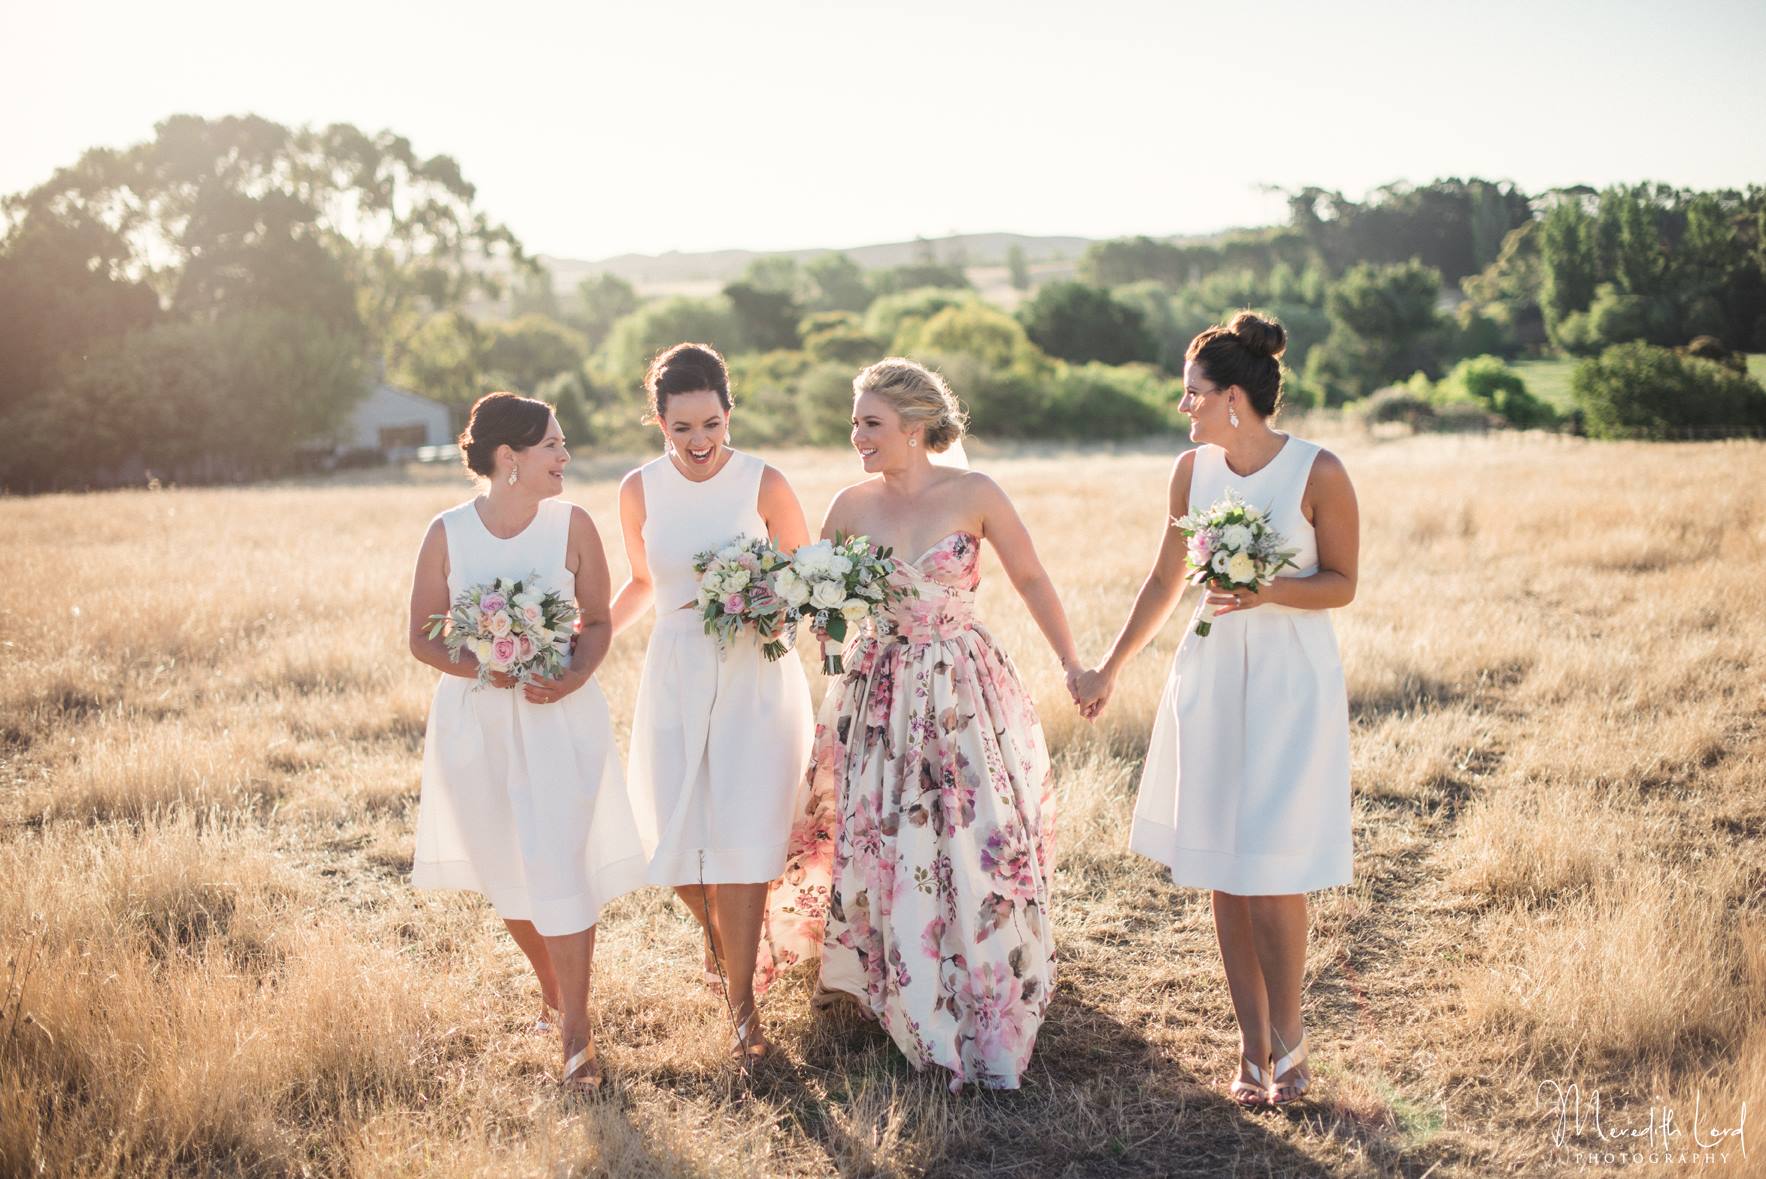 20 Floral Patterned Wedding Dresses That Will Take Your Breath Away - Wendy Makin